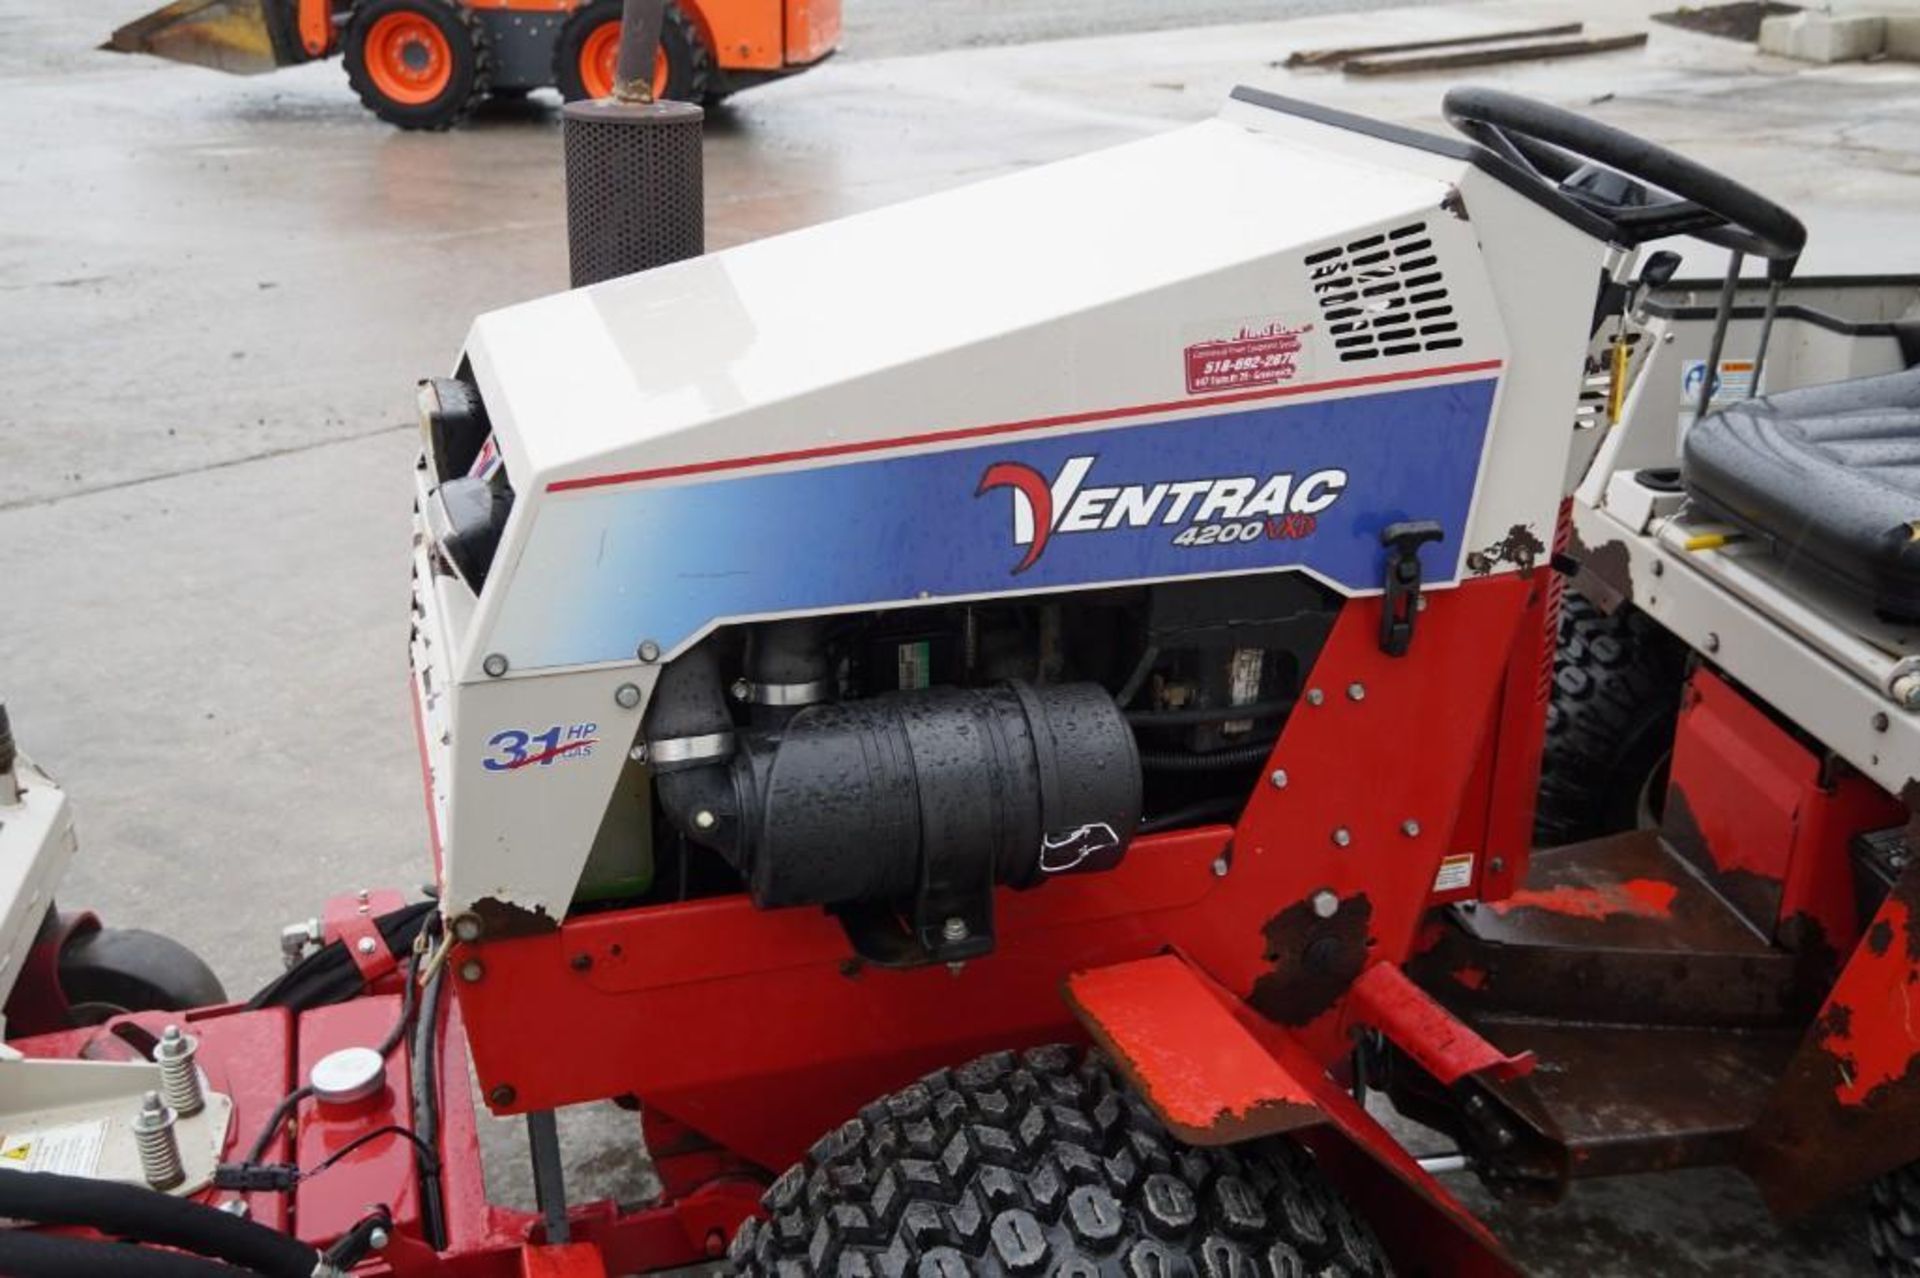 Ventrac 4200 Tractor - Image 15 of 37